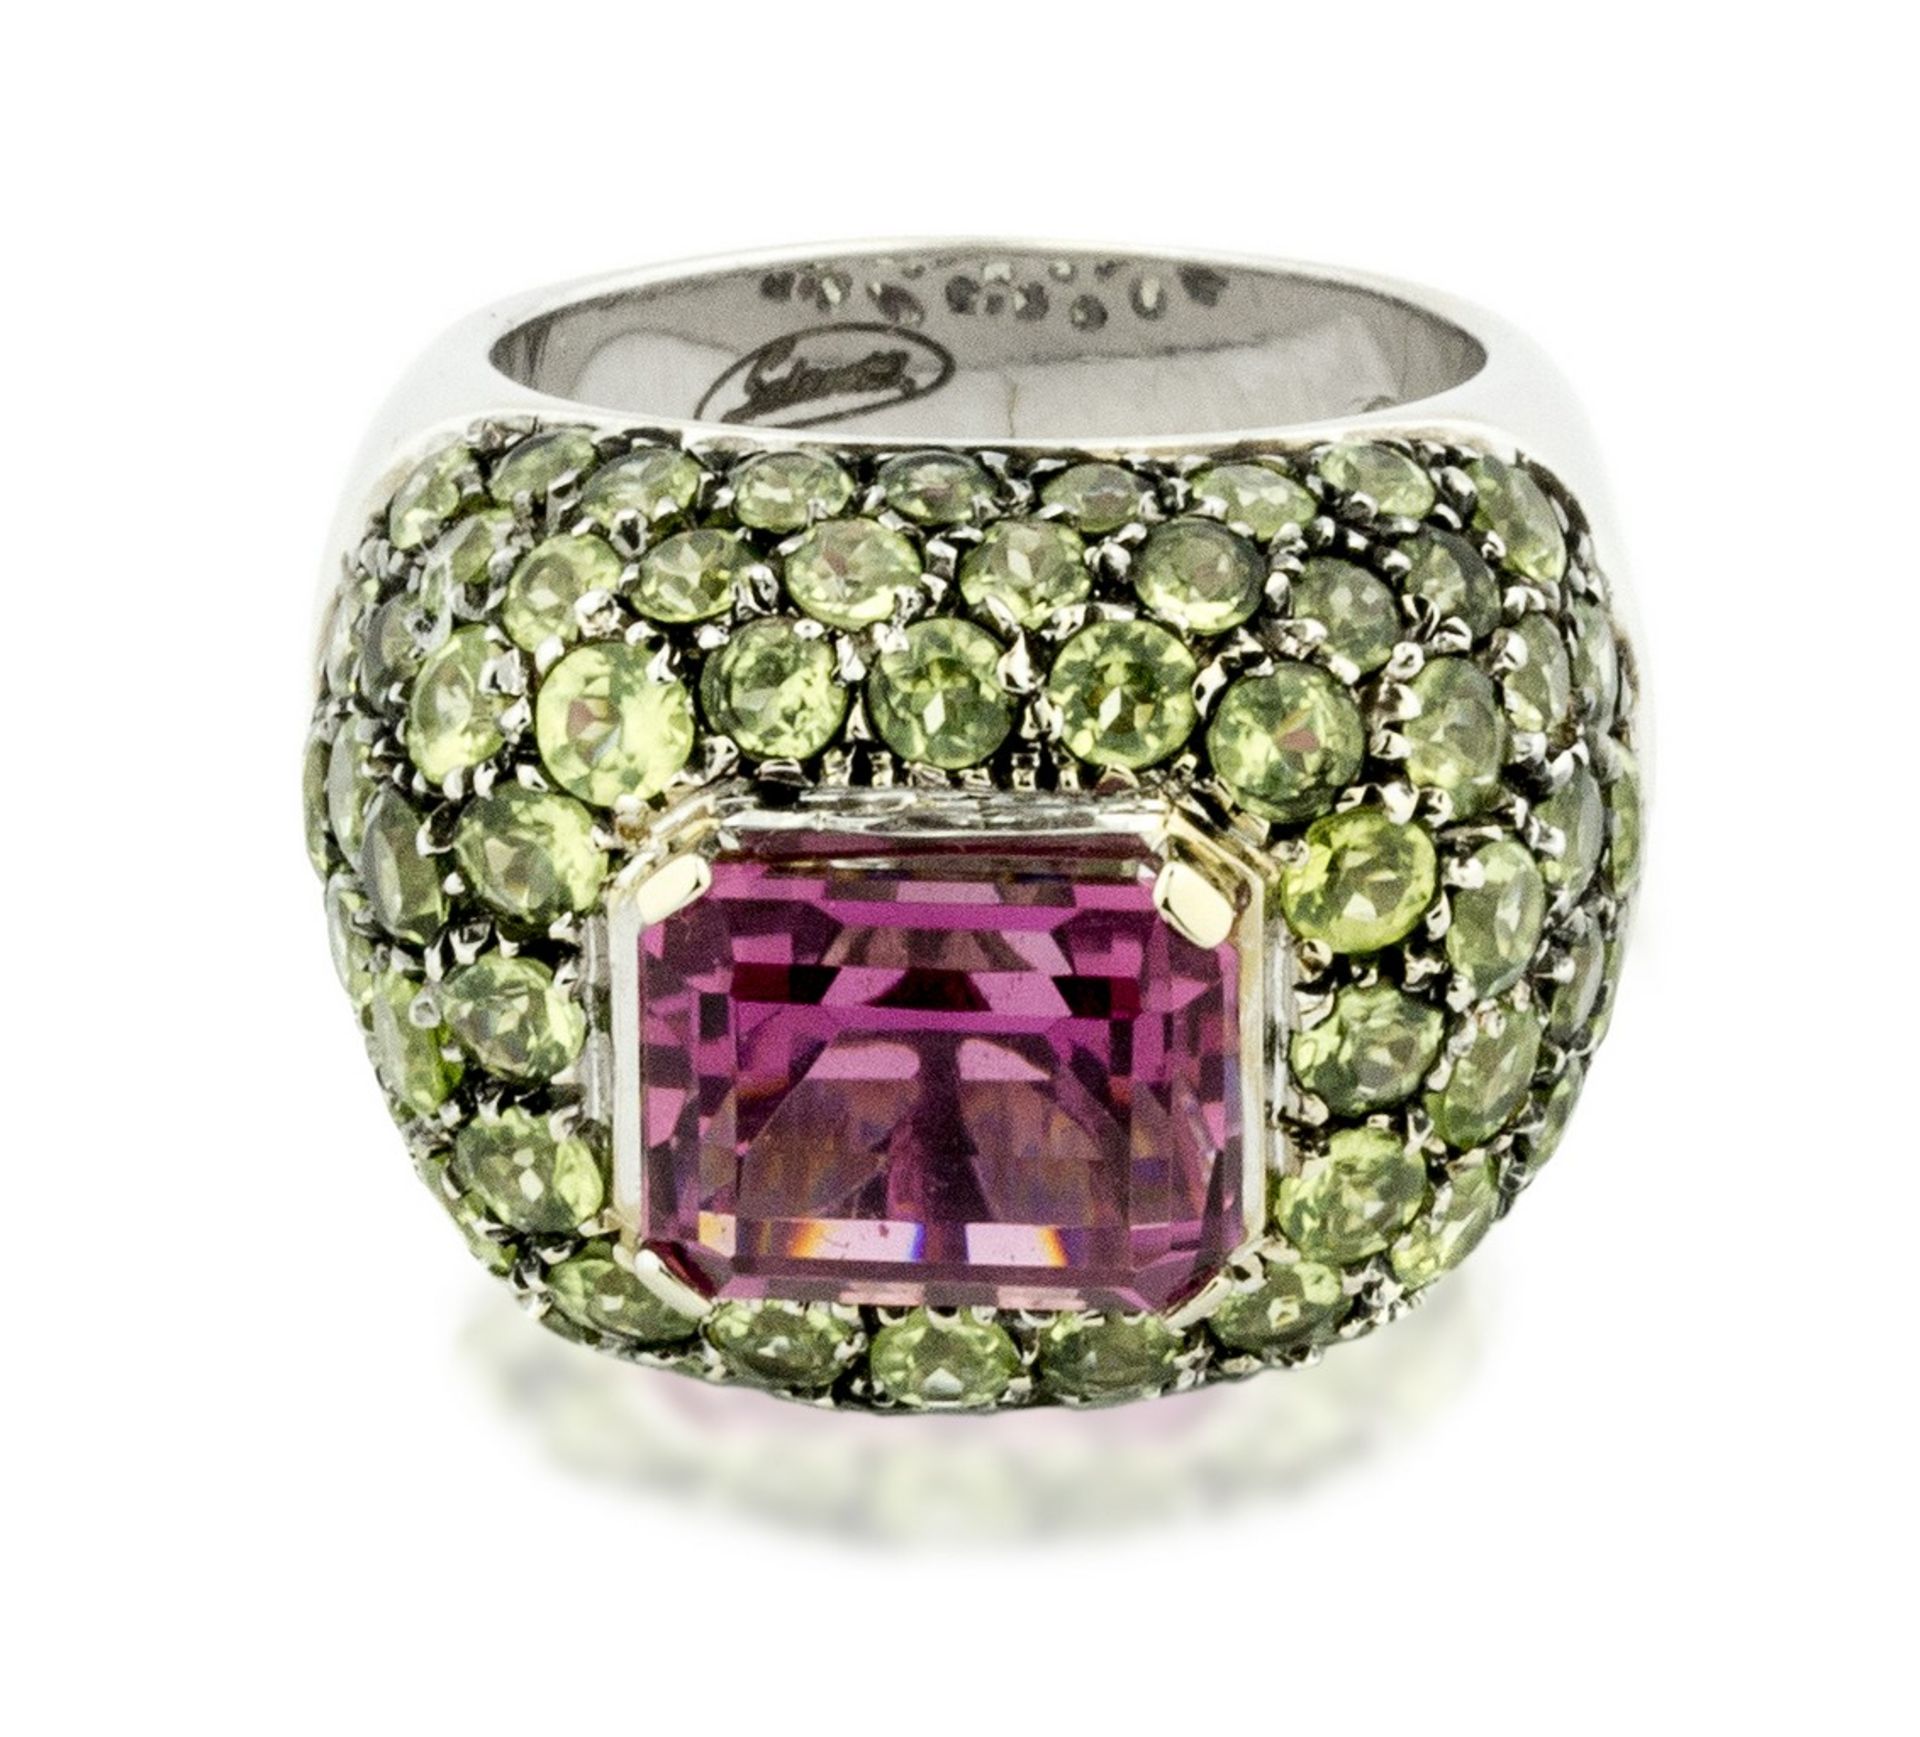 SALAVETTI, GEM-SET RING Centered an emerald-cut pink tourmaline, surrounded by pave-set round